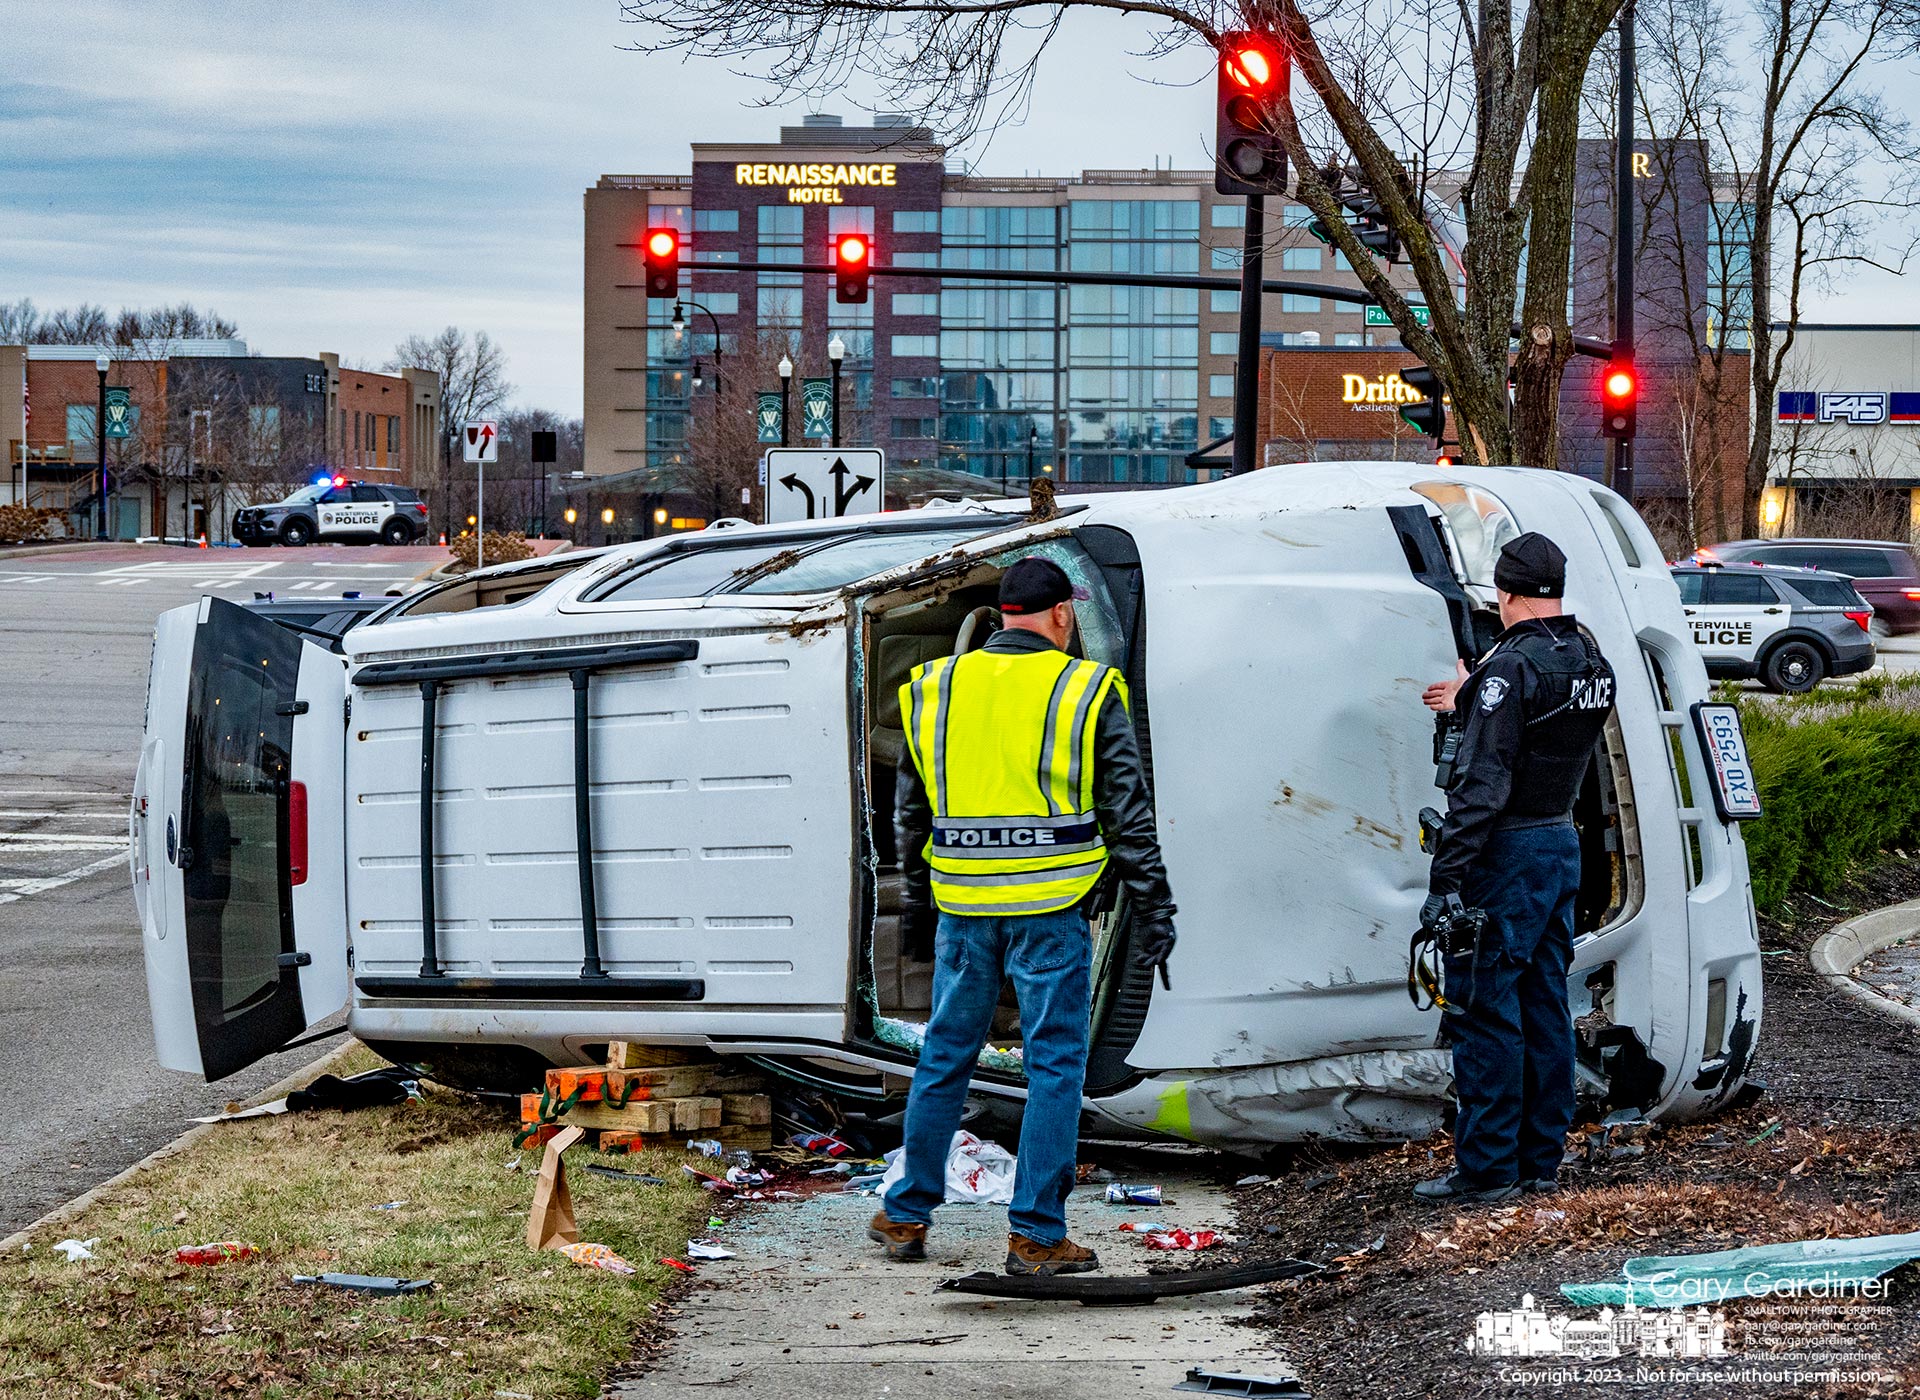 Westerville police crash investigators talk as they inspect a single-car crash at Polaris Parkway and Meridian Way late Sunday afternoon that required a person to be transported to the hospital. My Final Photo for January 8, 2023.